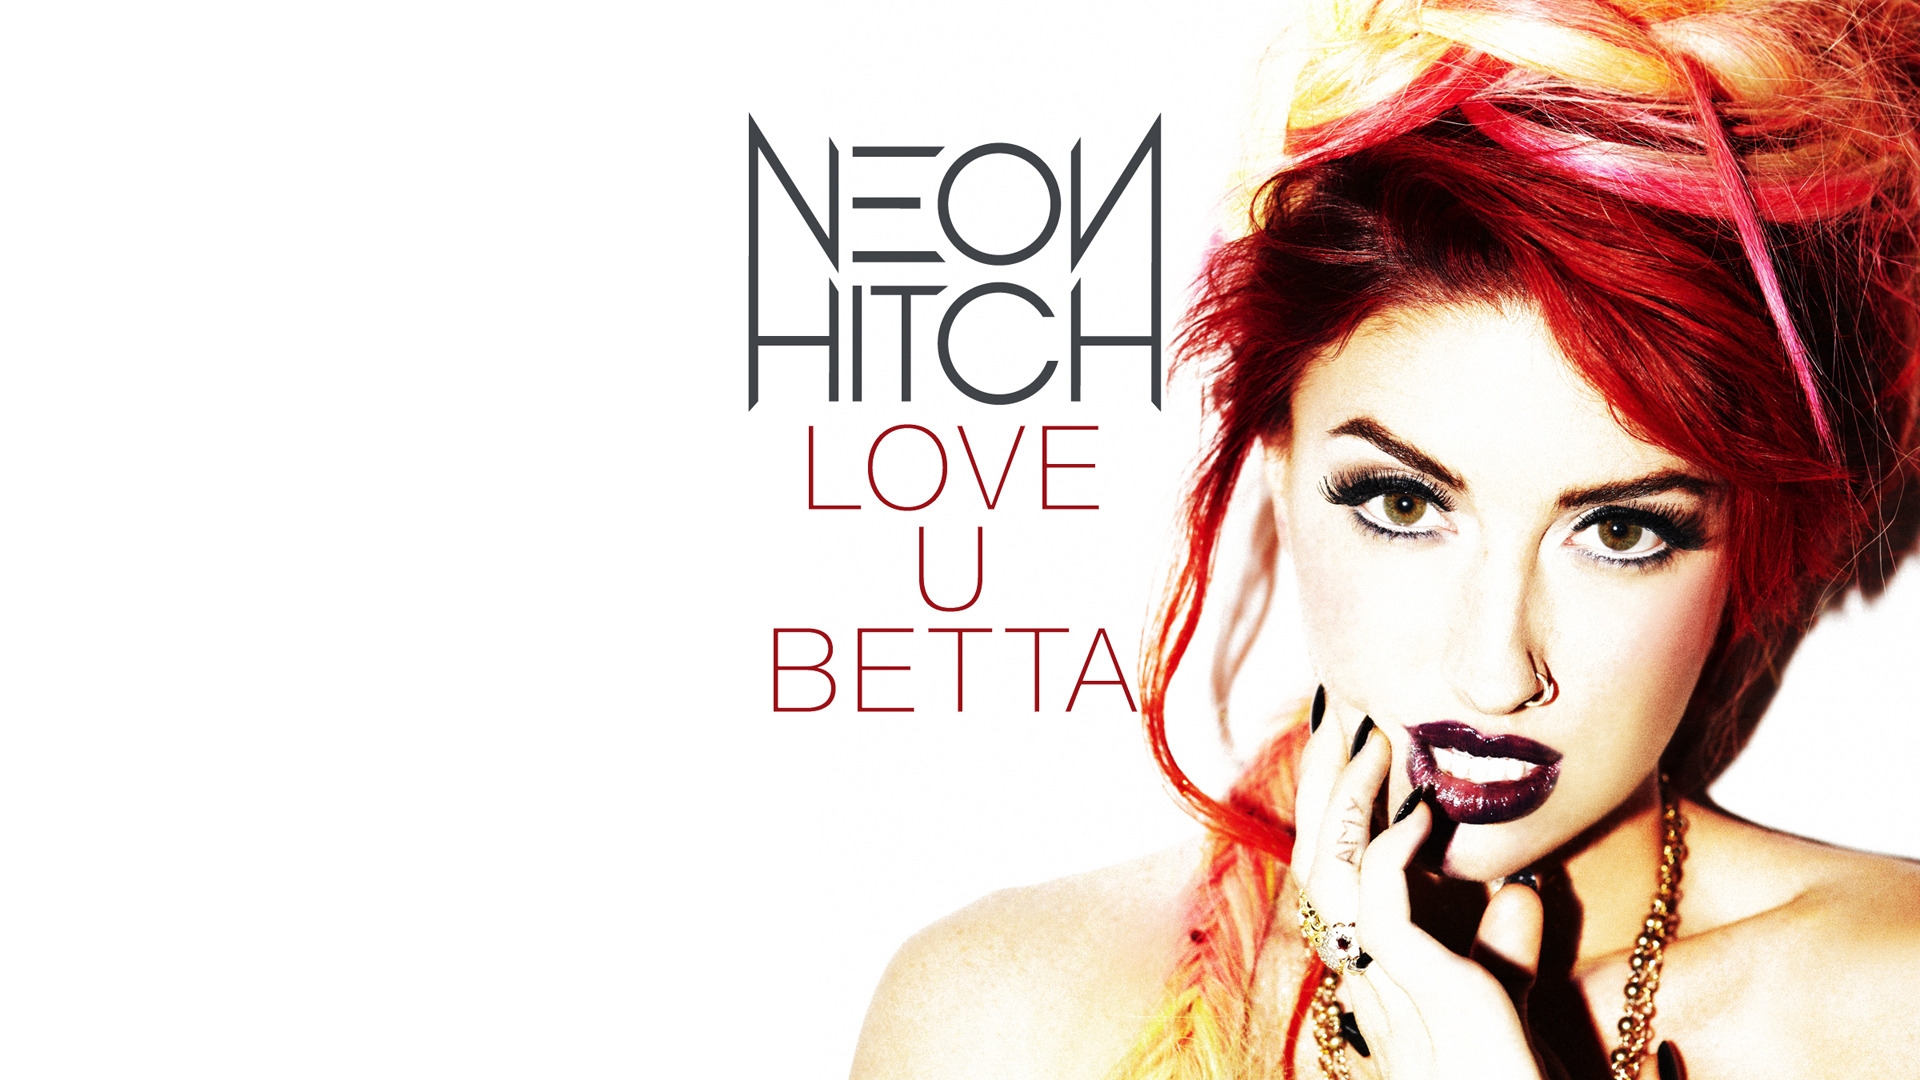 Beautiful Neon Hitch for 1920 x 1080 HDTV 1080p resolution